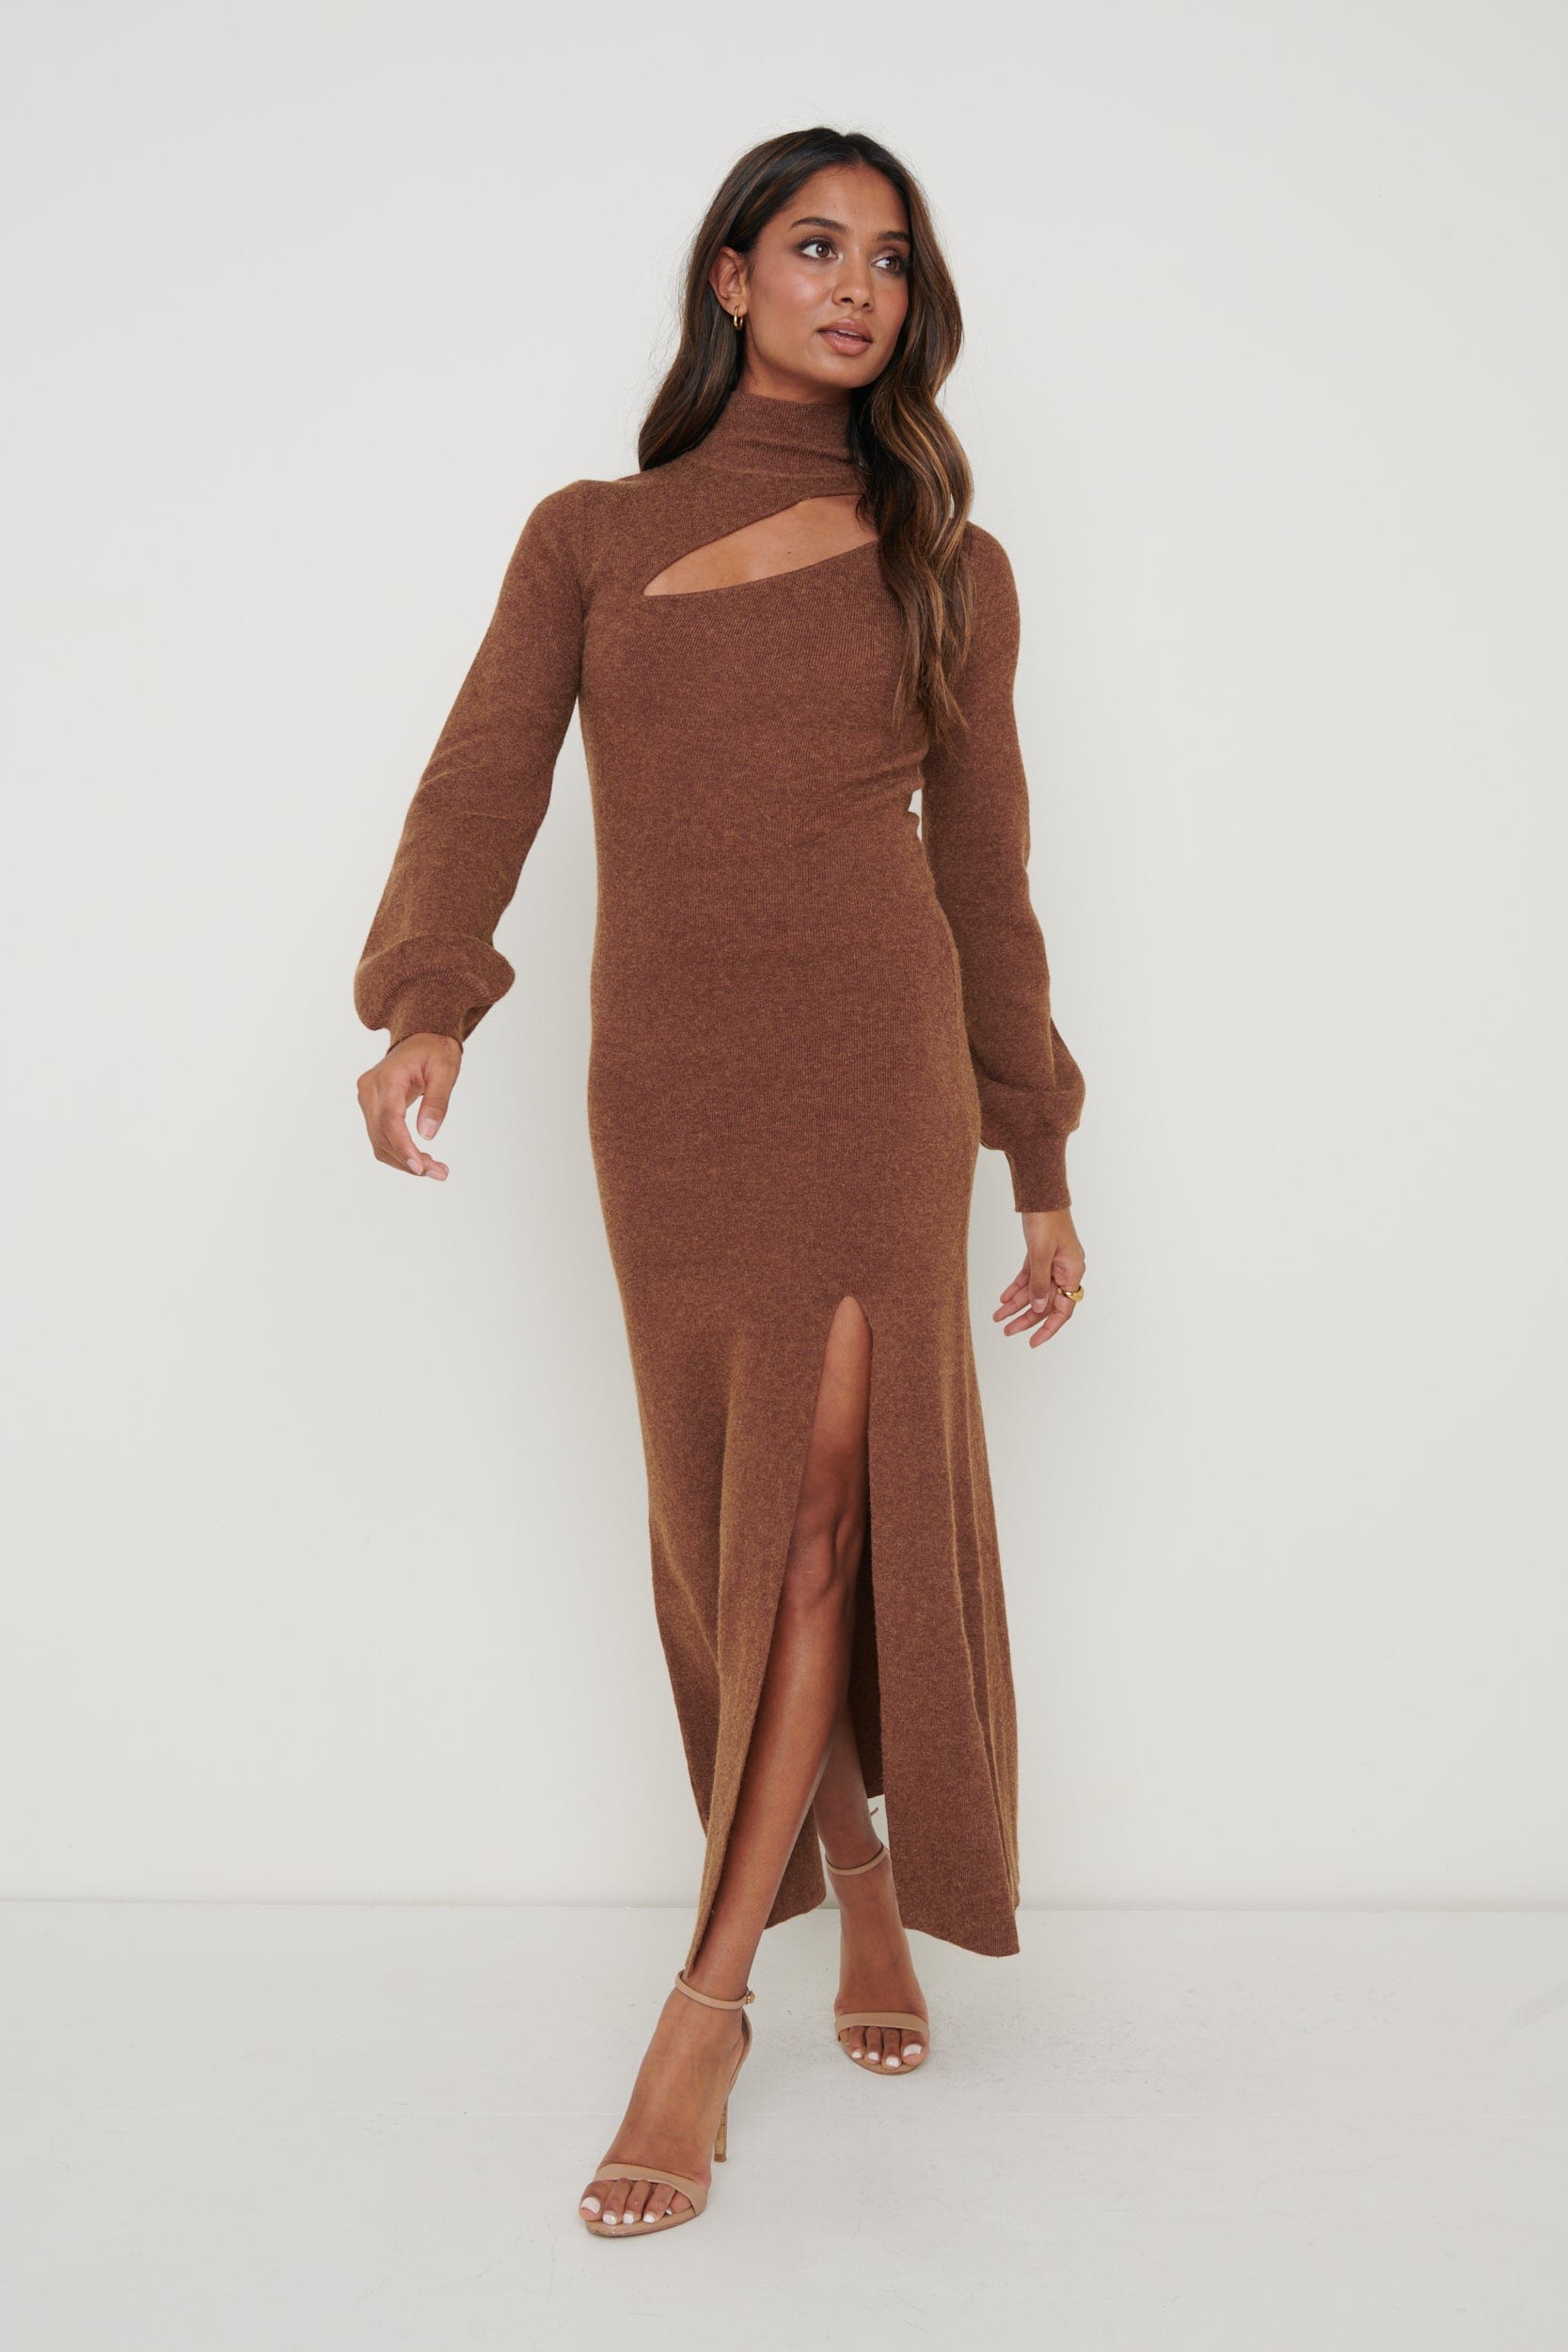 Jolie Cut Out Knit Dress - Chocolate Brown, S